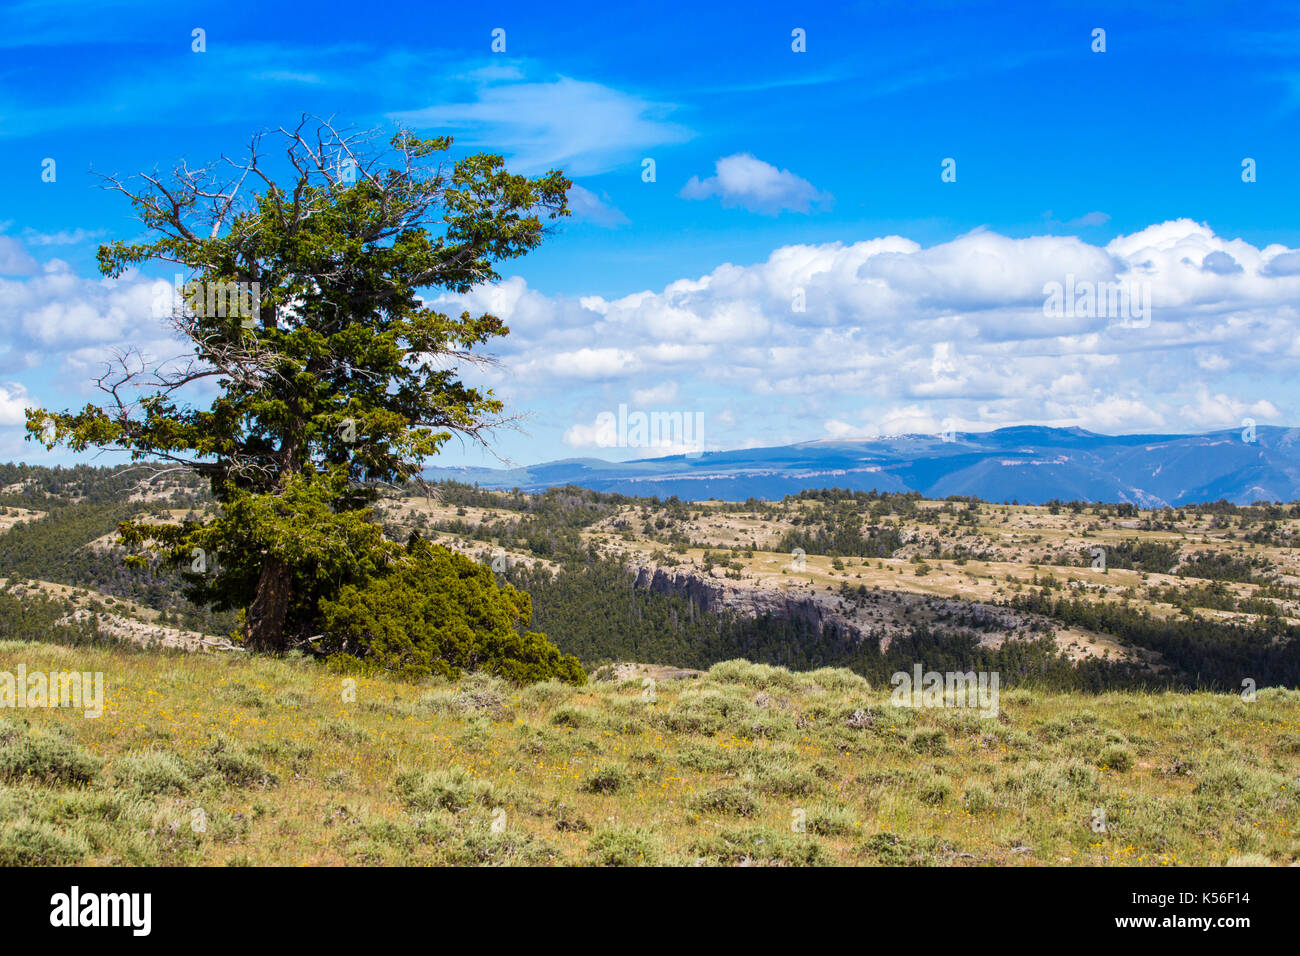 A lanscape in the Pryor mountains of Northern Wyoming. Stock Photo